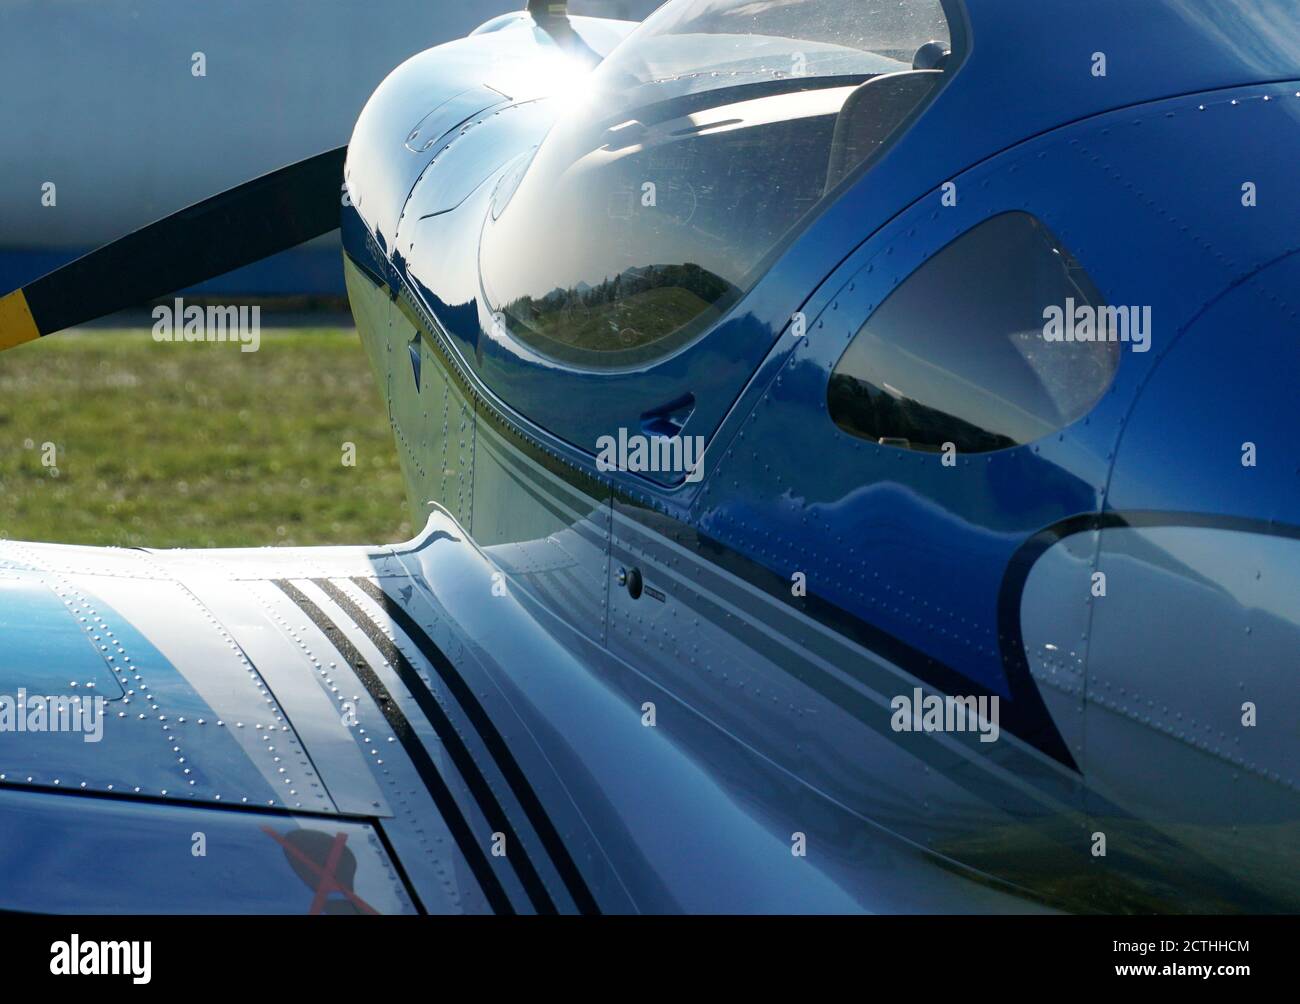 Single concept image of a part of an air-plane with reflections of the sun and copy space close-up shot. Stock Photo